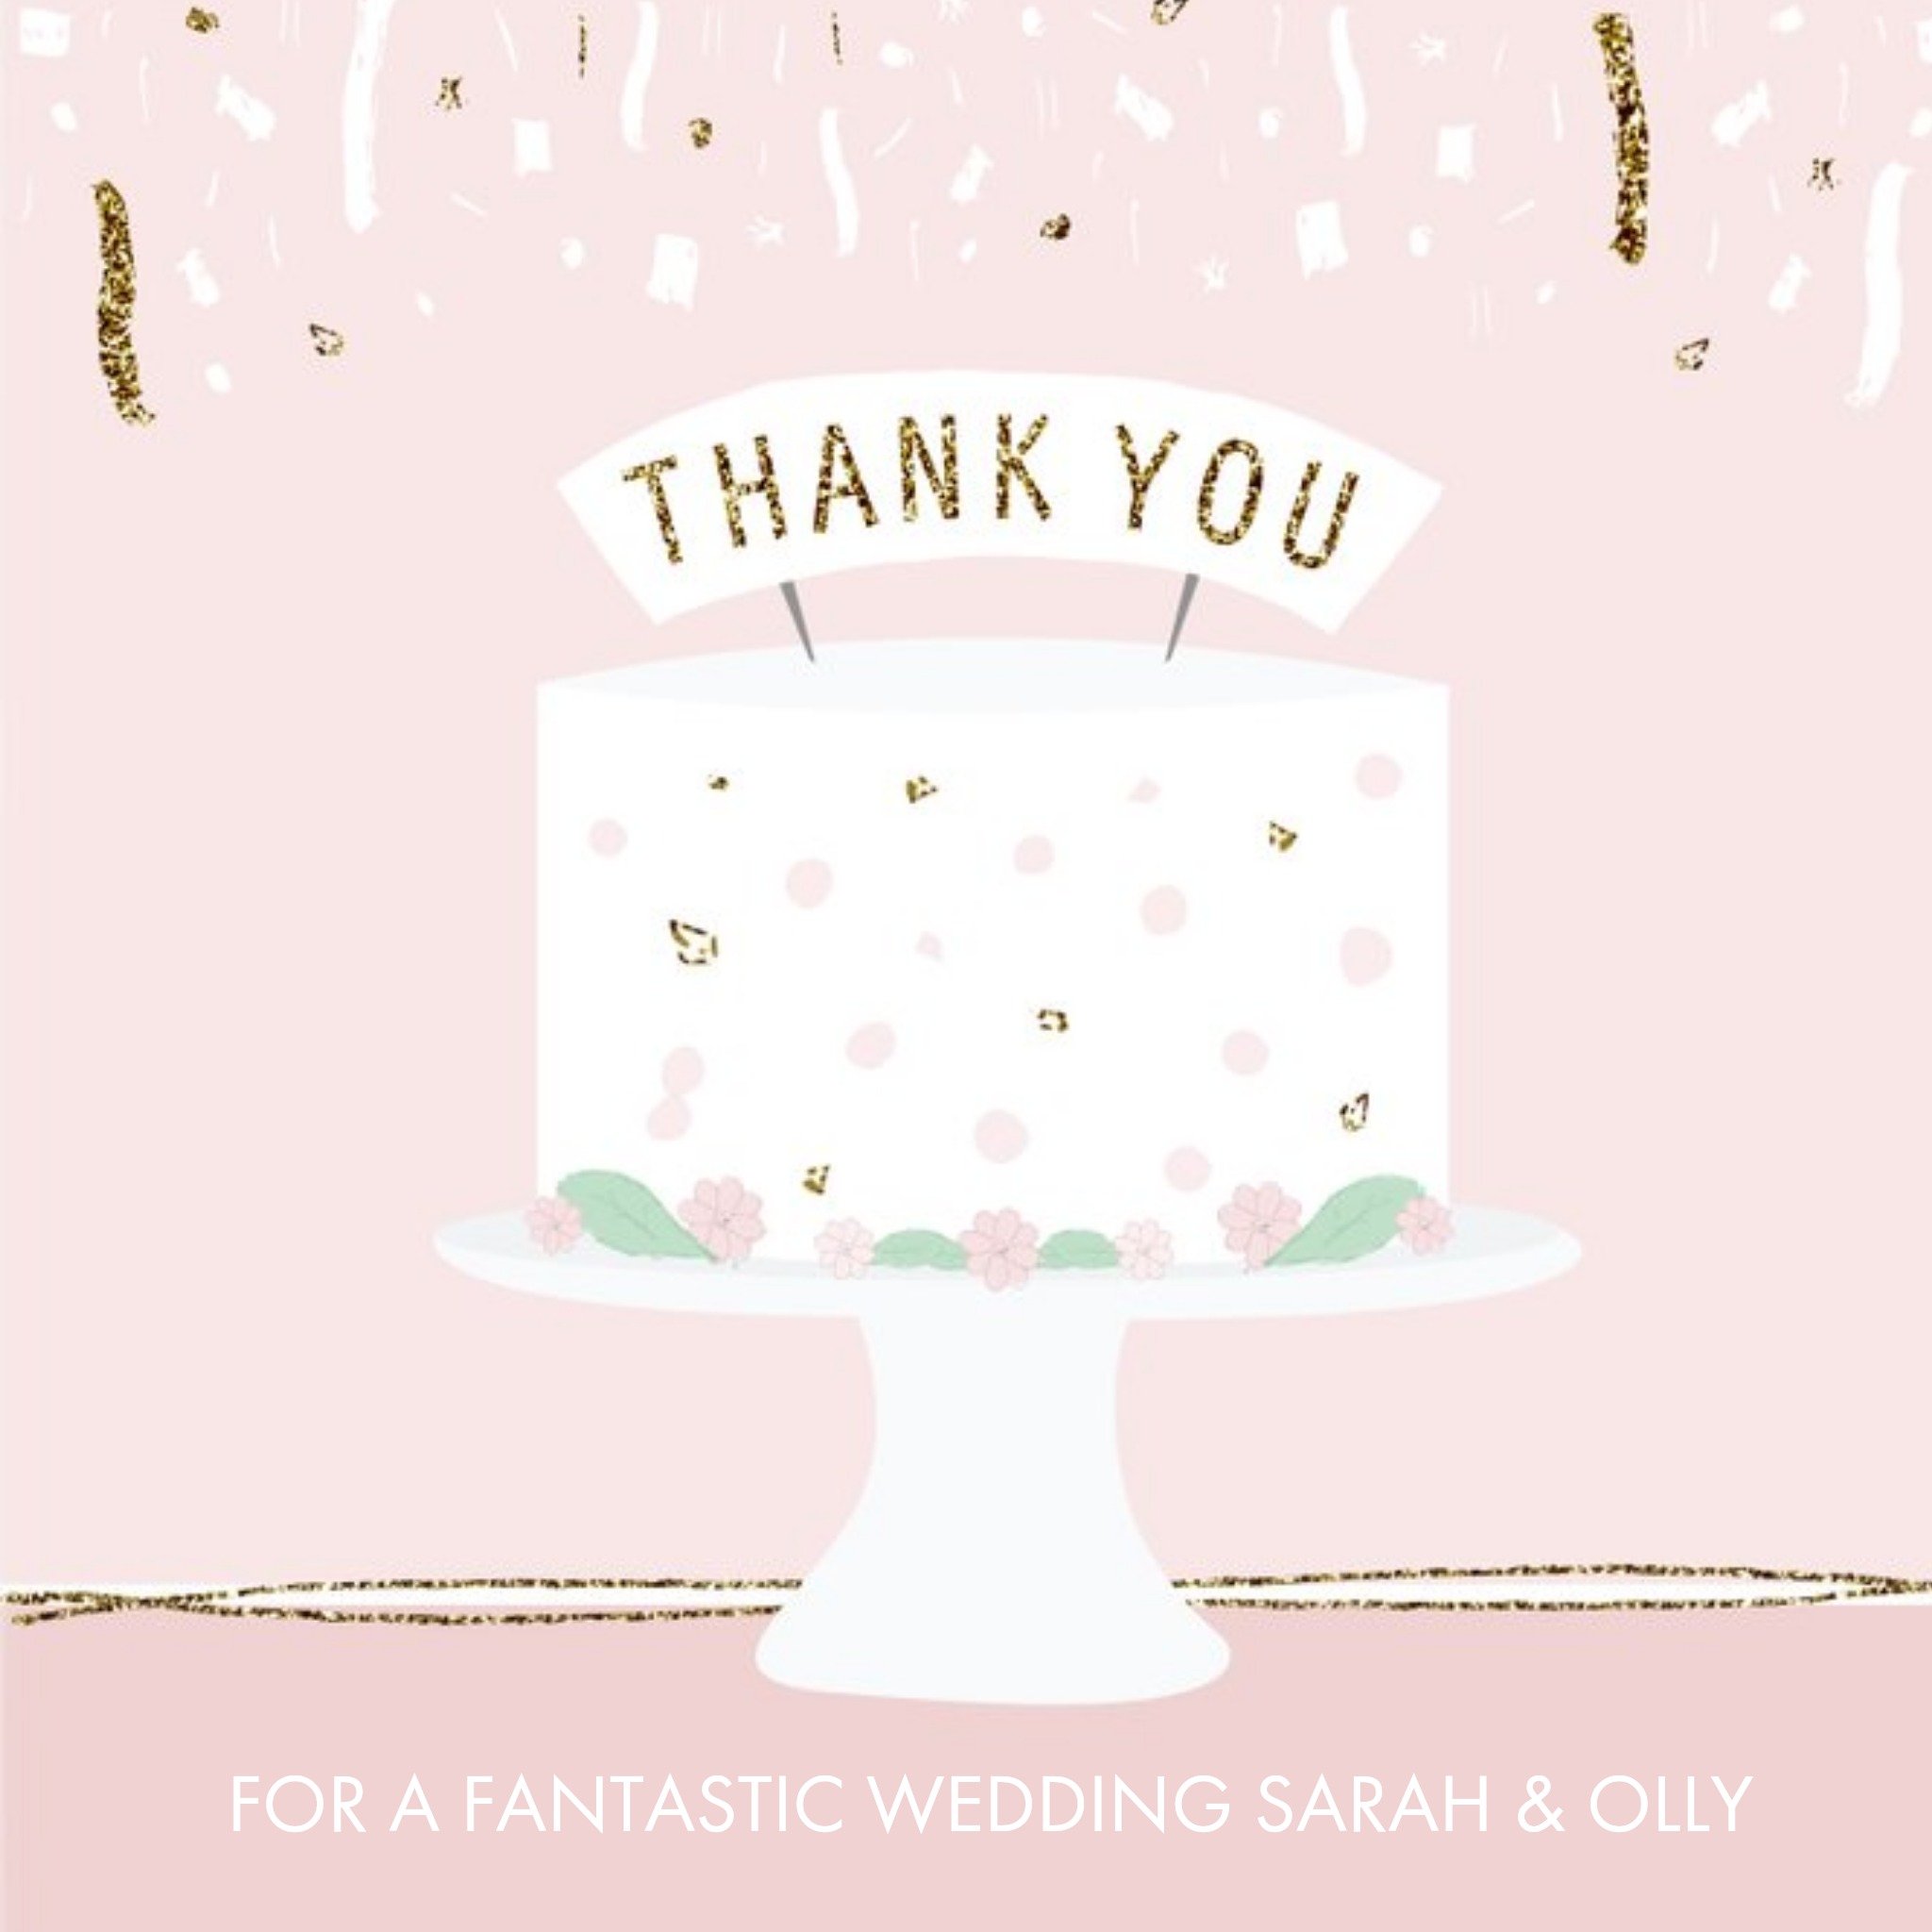 Moonpig Cake And Confetti Personalised Wedding Day Card, Large